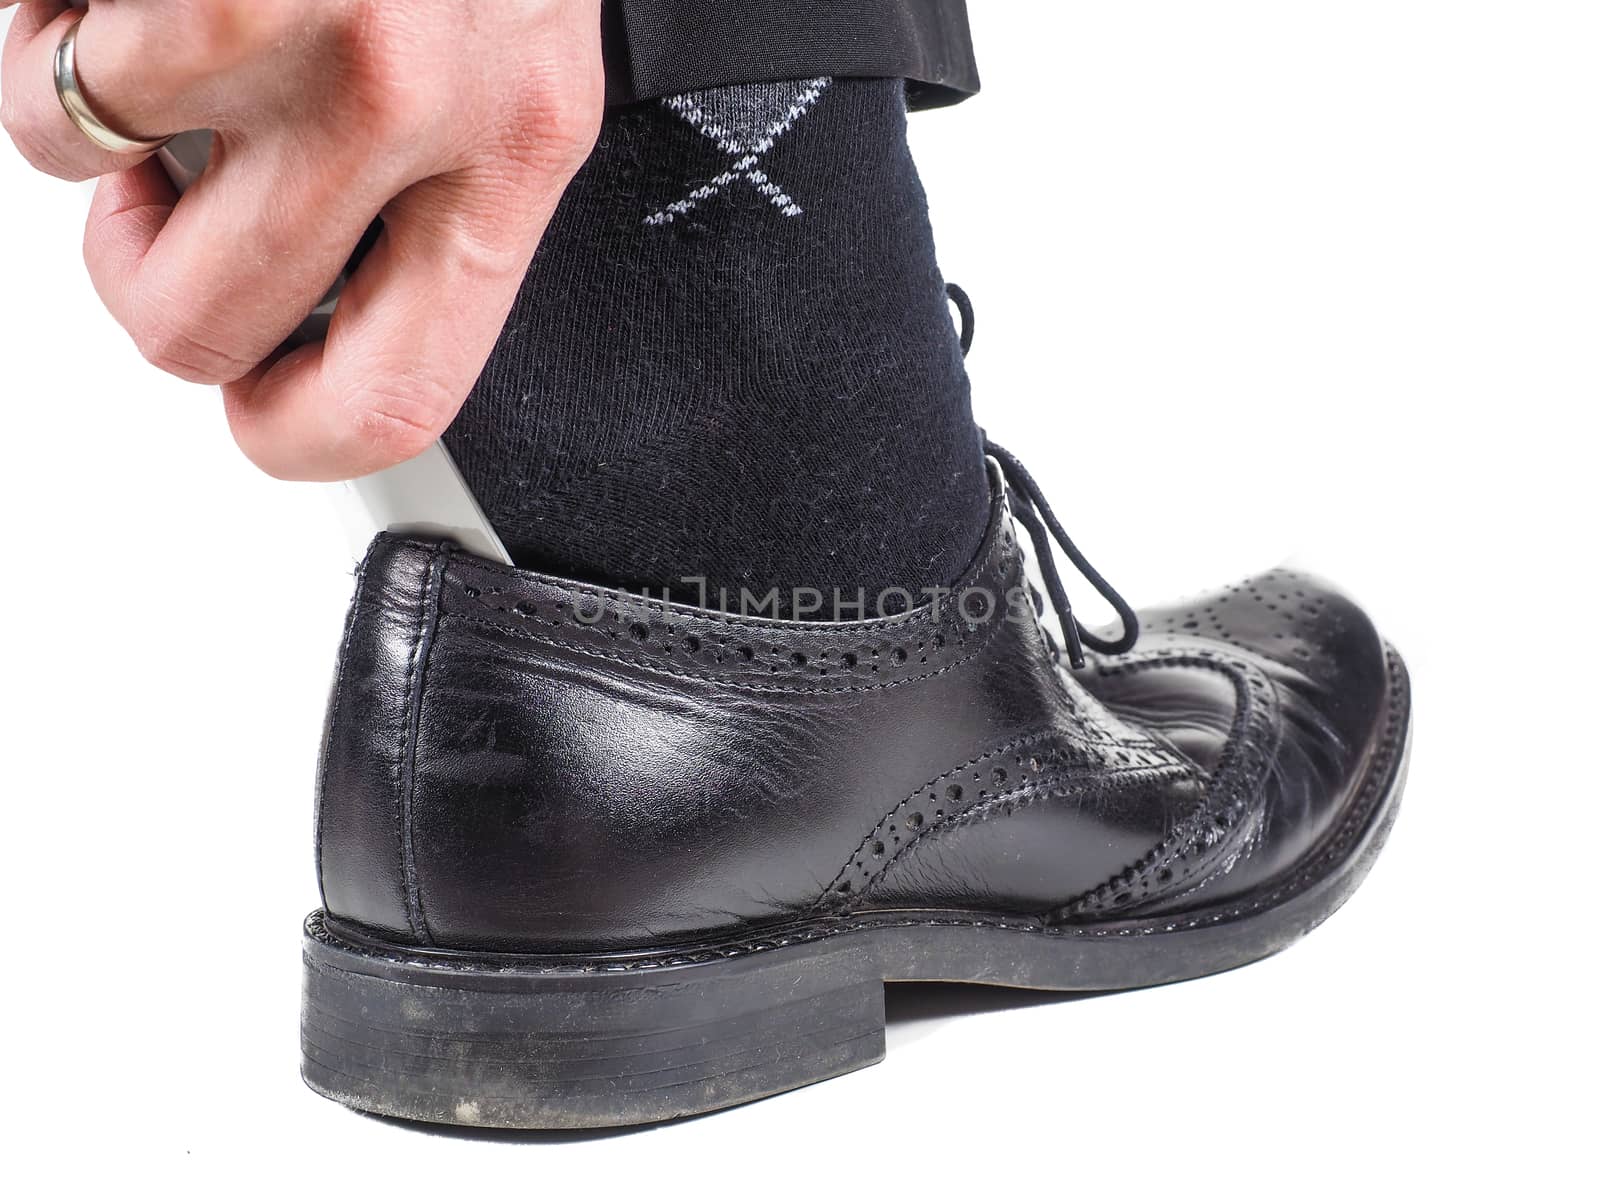 Male hand entering foot into black leather shoe by Arvebettum